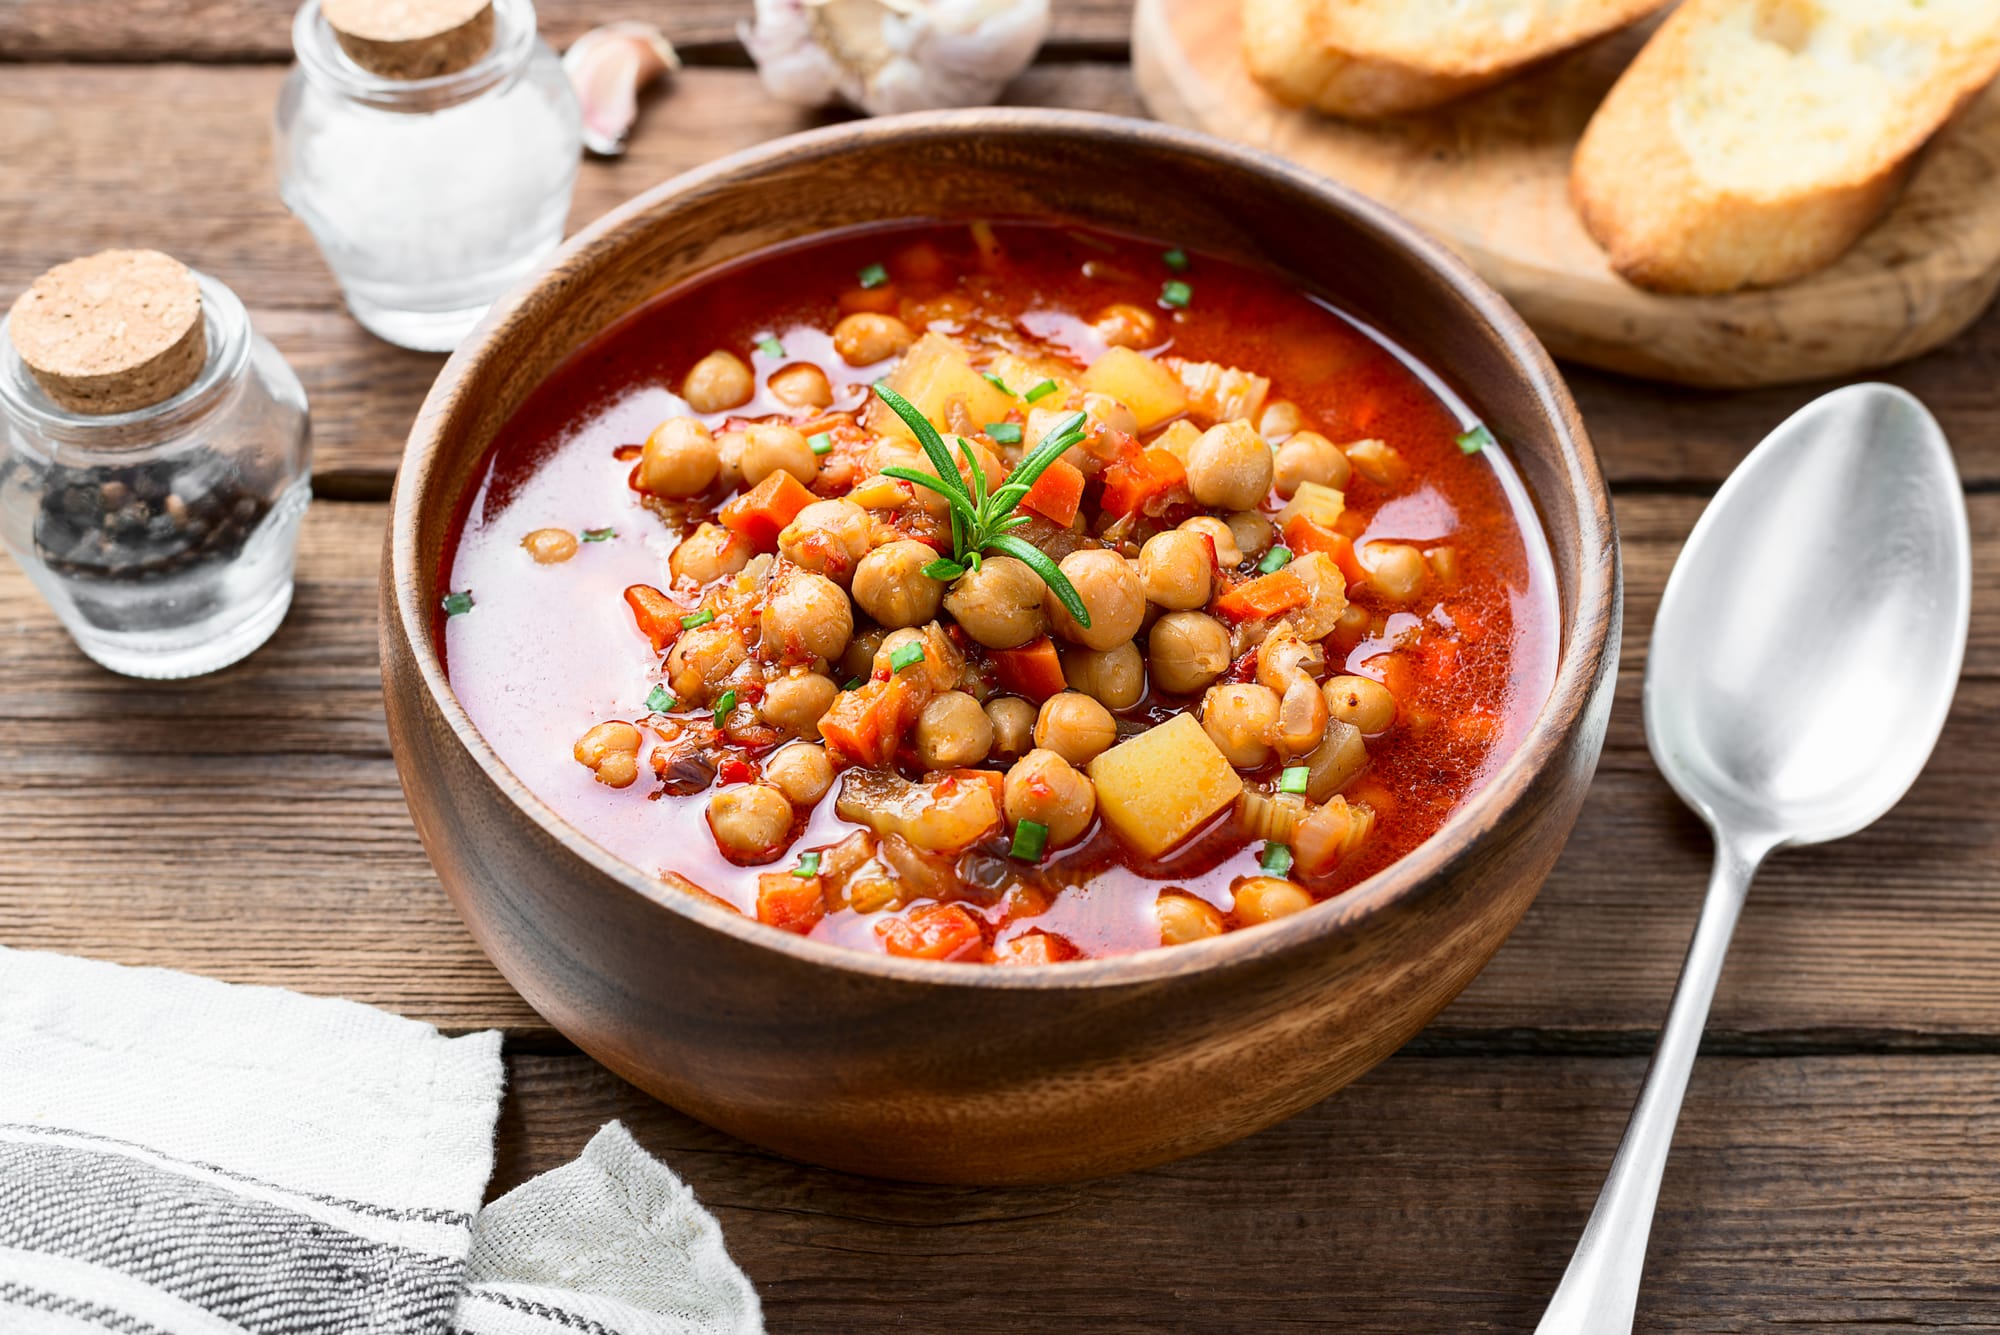 Tomato, Lentil and Chickpea Soup